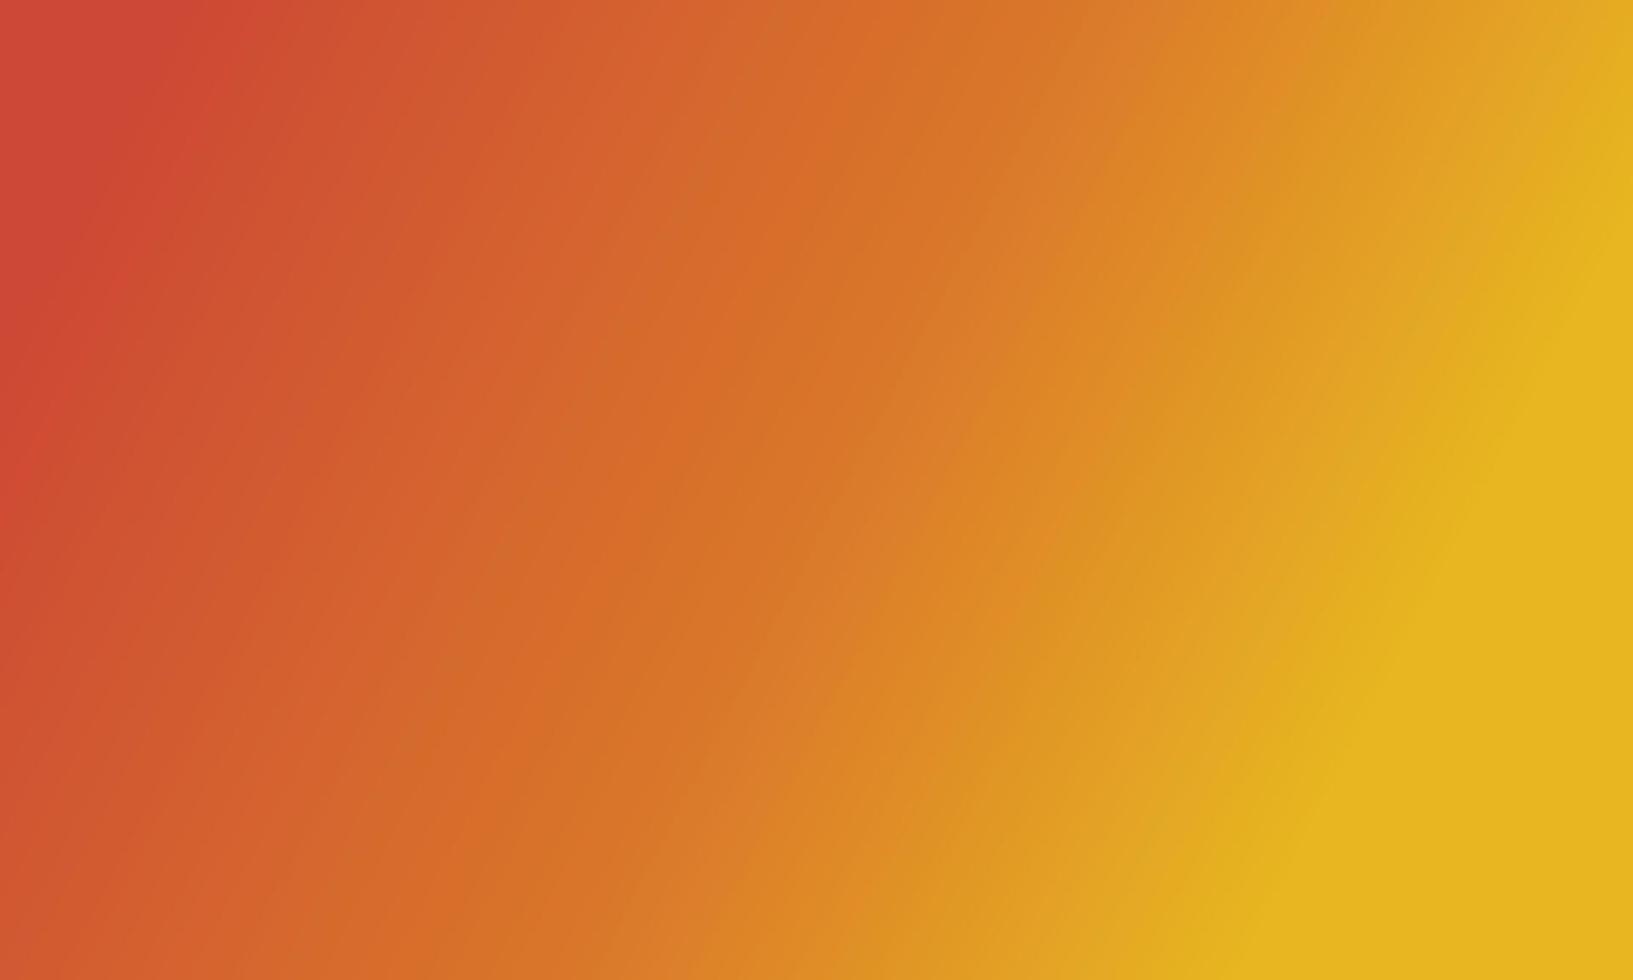 Red and Yellow gradient background vector